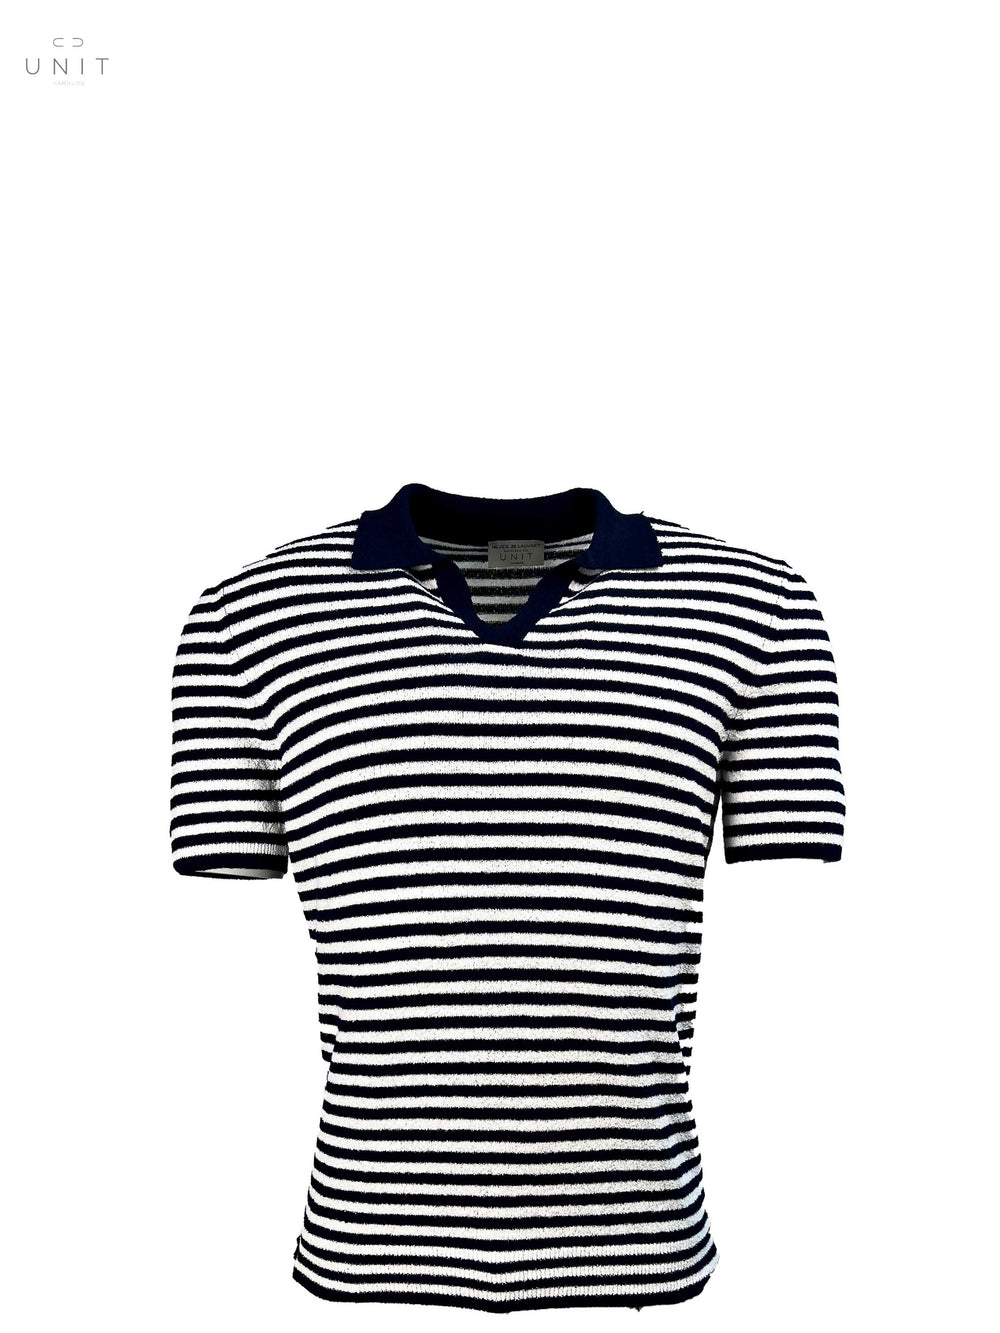 Never Laundry 57163/22101 Frottee Polo Streifen weiß/navy